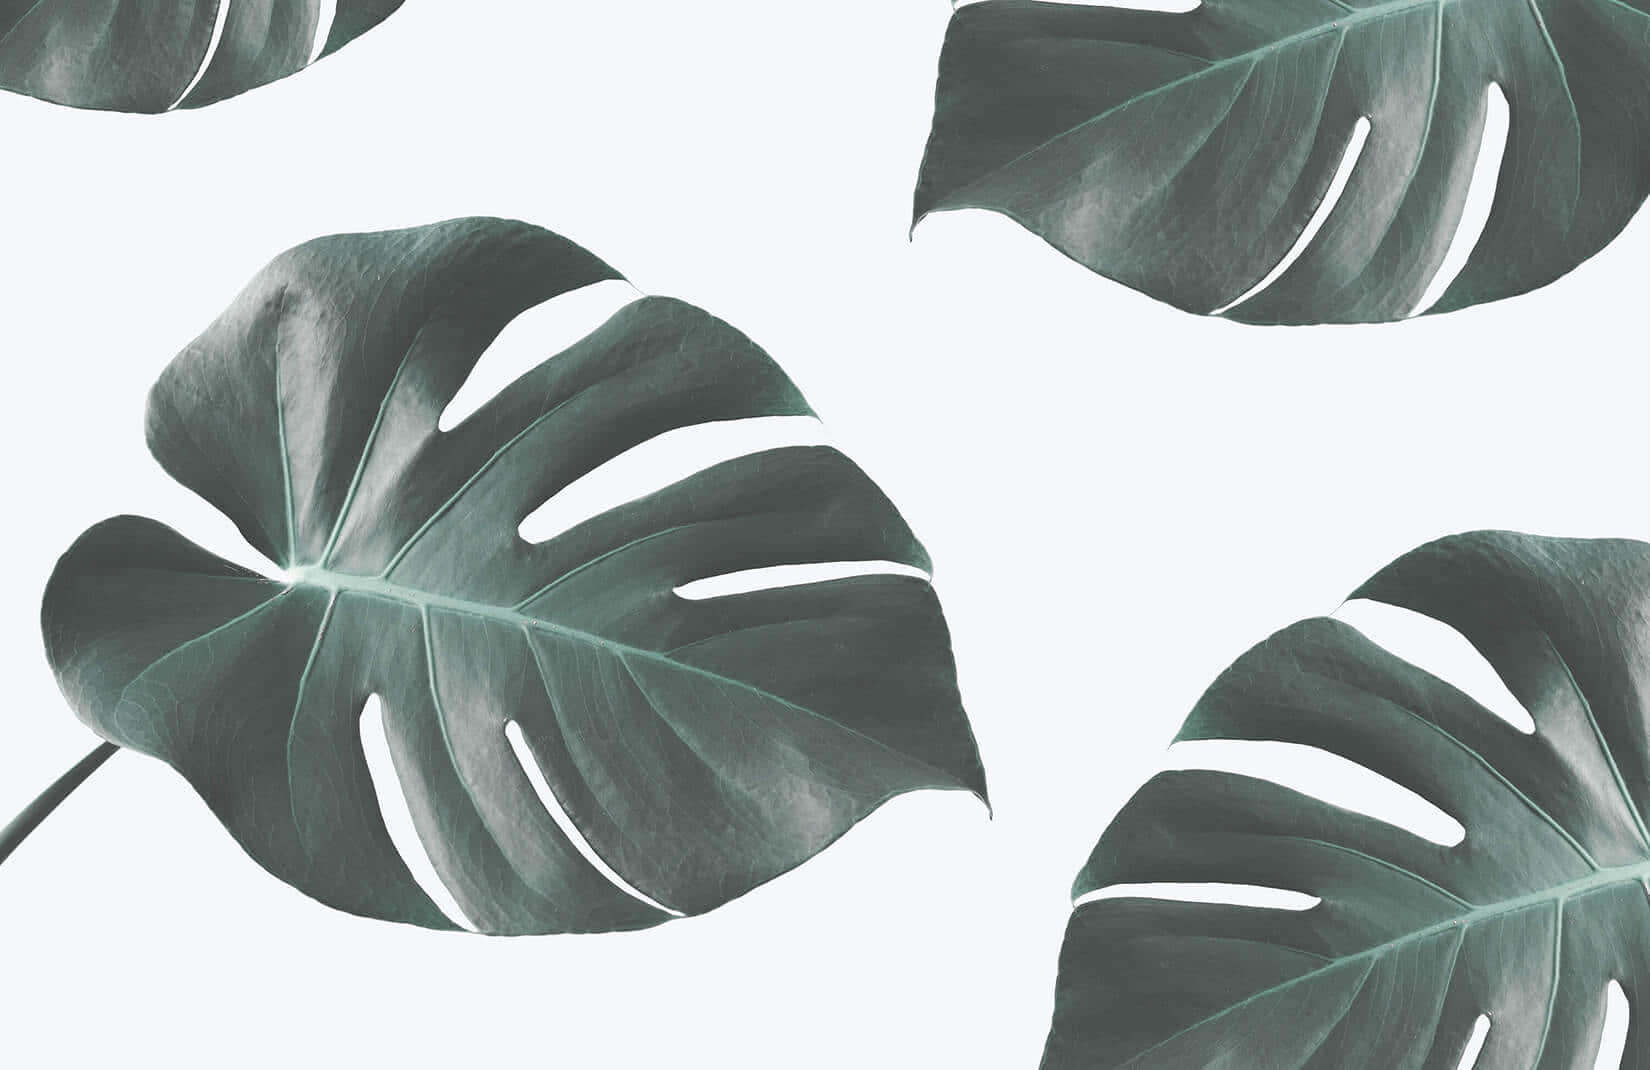 Enjoy the beautiful Monstera leaves in this lush green background